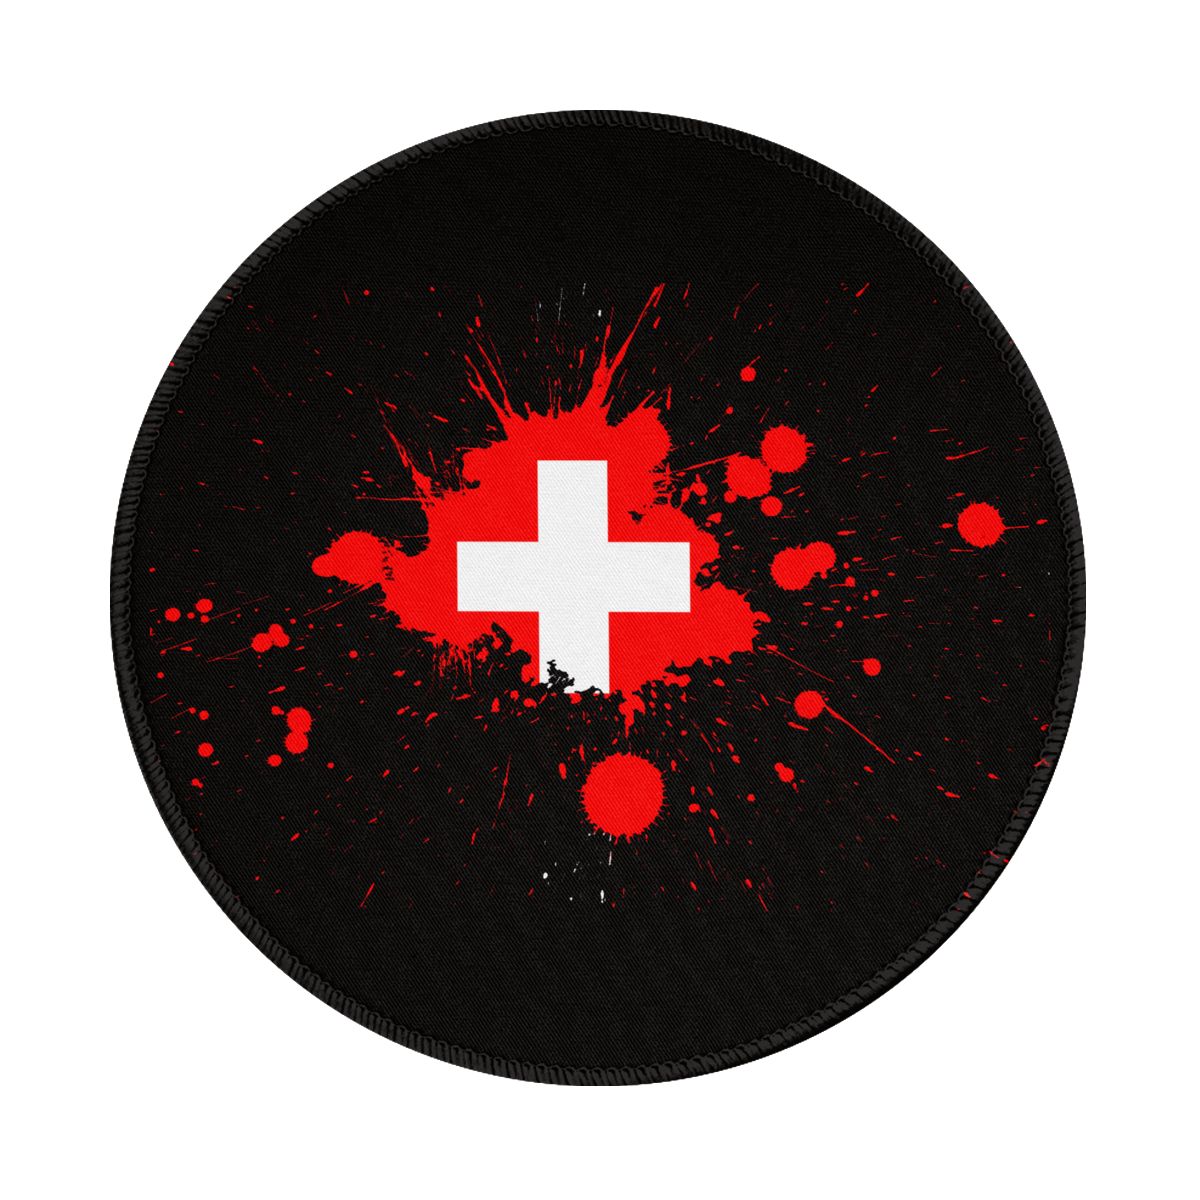 Switzerland Ink Spatter Gaming Round Mousepad for Computer Laptop